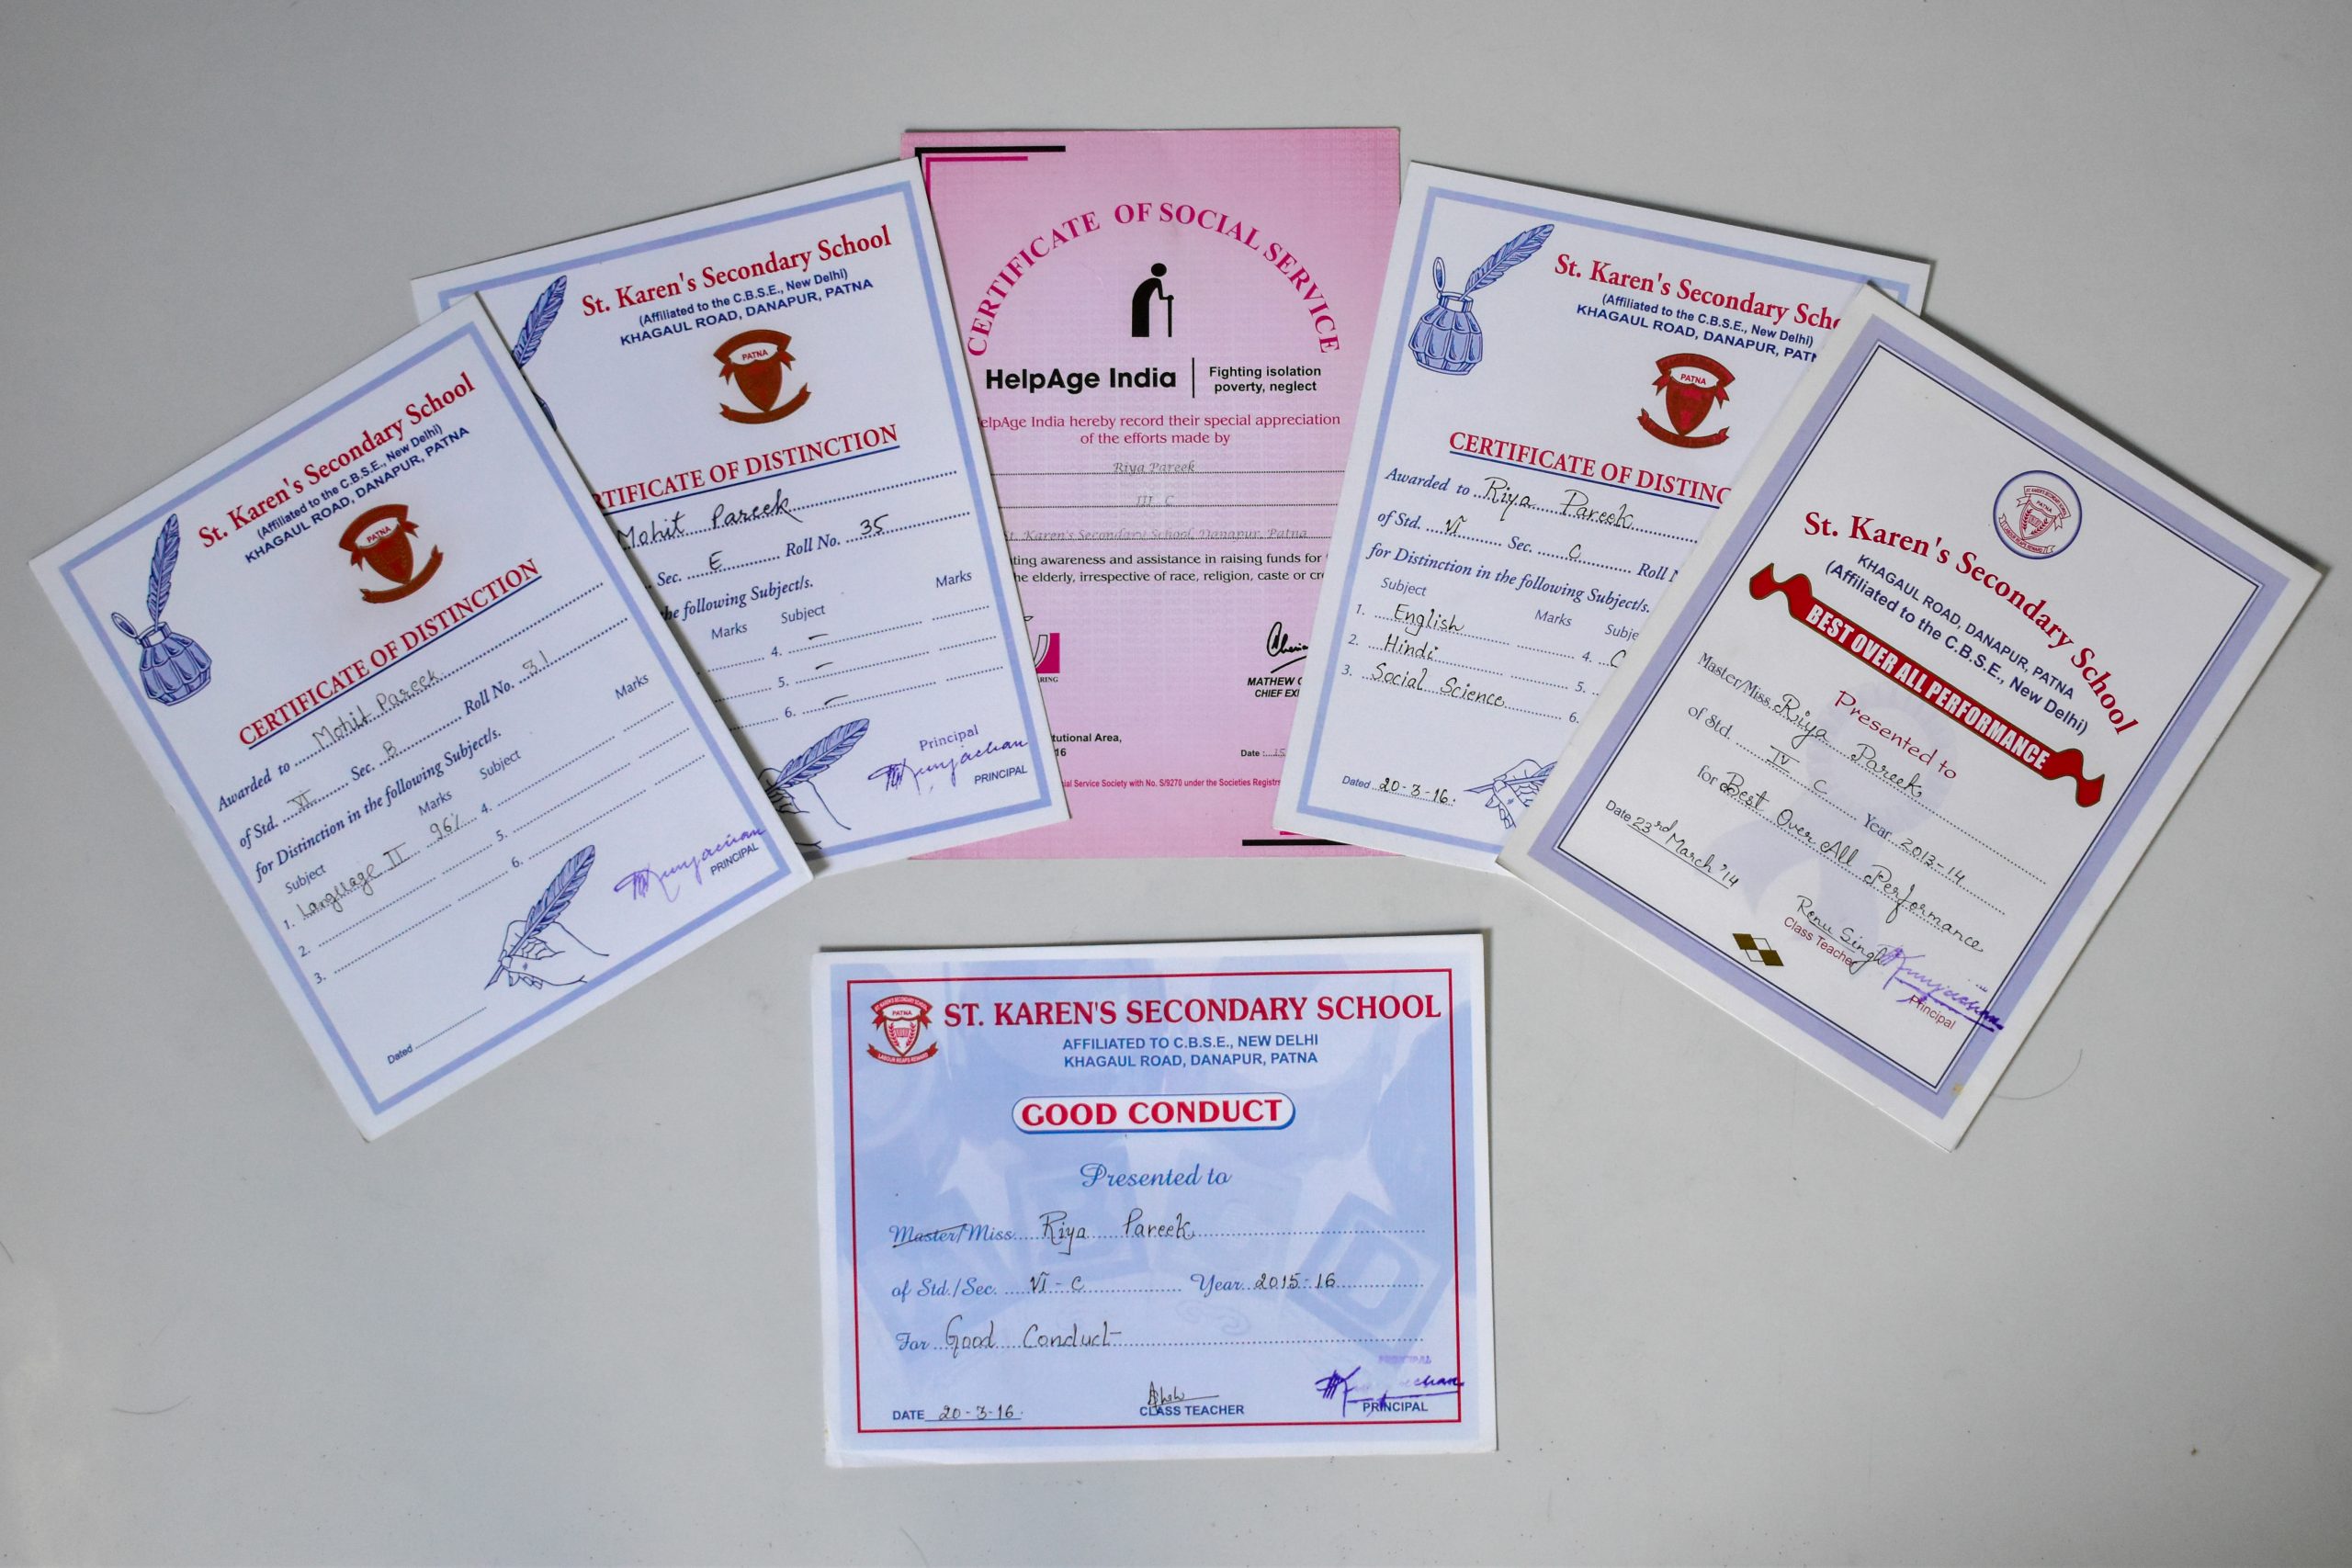 School certificates of a person